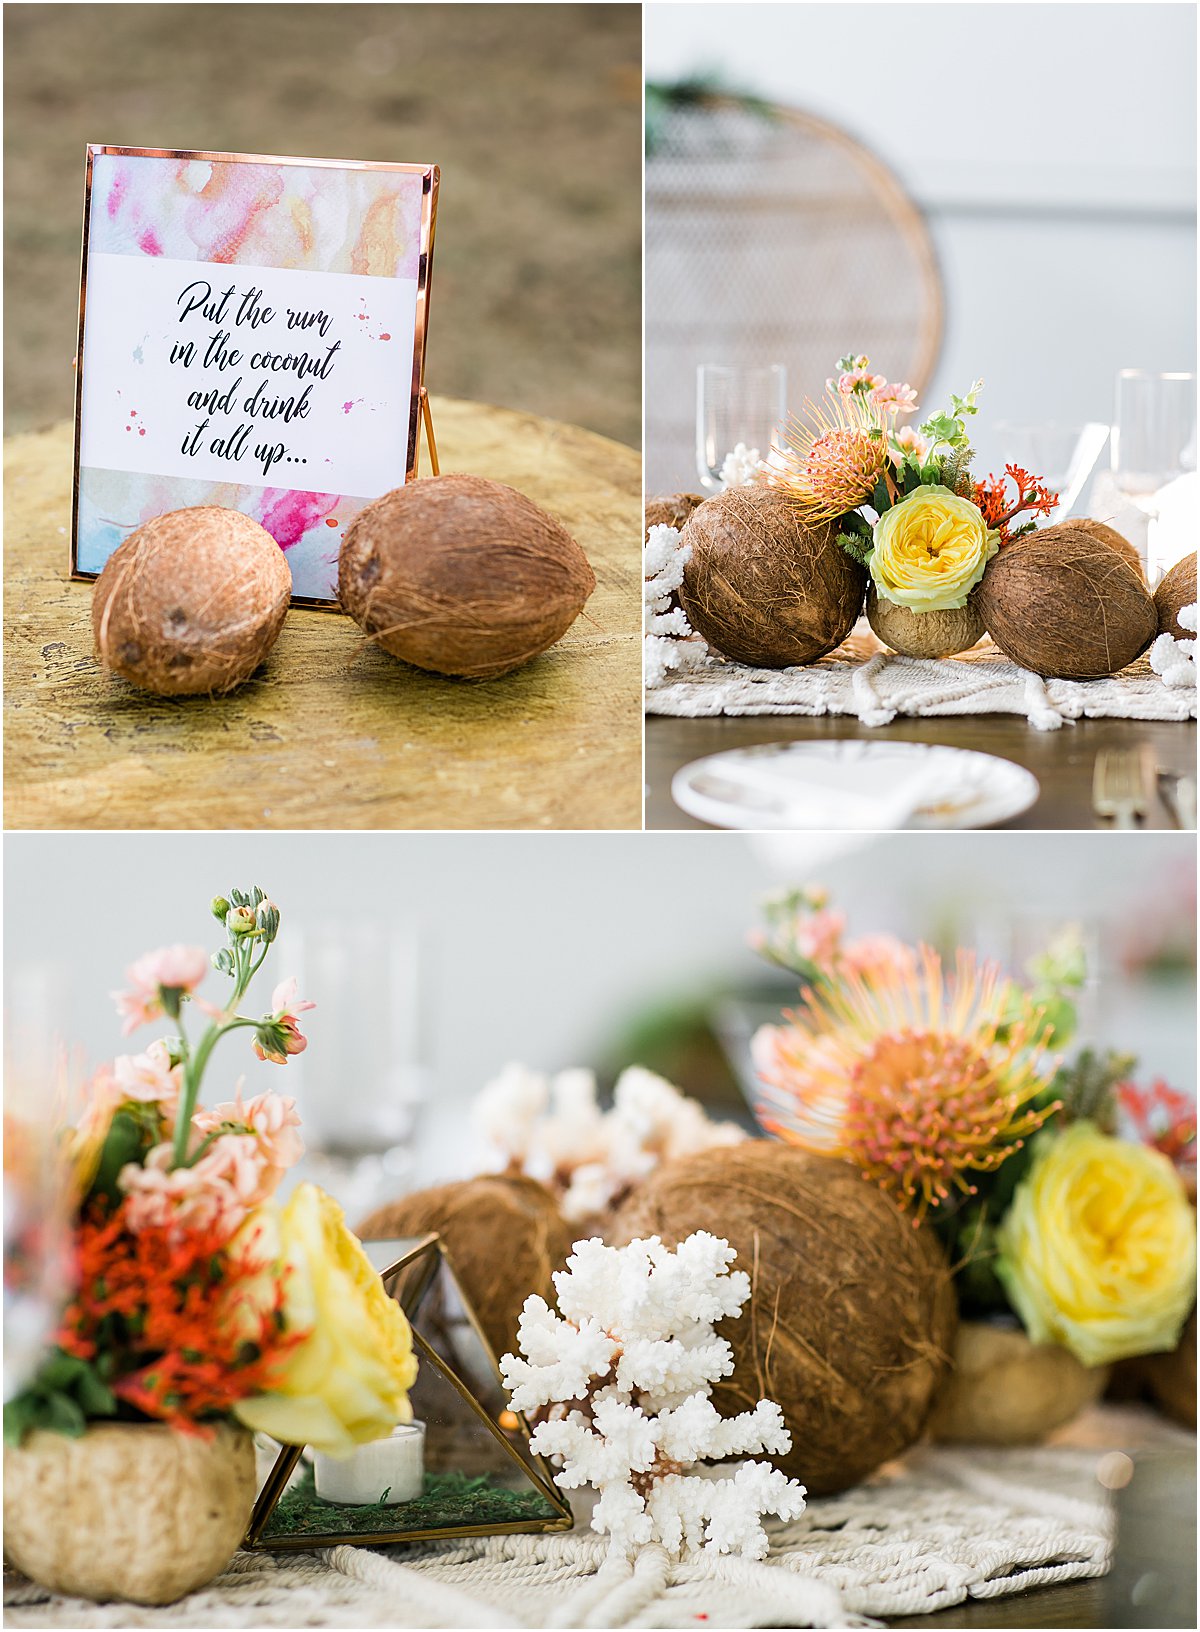 Coconut and Coral Tropical Wedding Details | Norton Museum of Art | Palm Beach, FL | Married in Palm Beach | www.marriedinpalmbeach.com | Blink & Co Photography